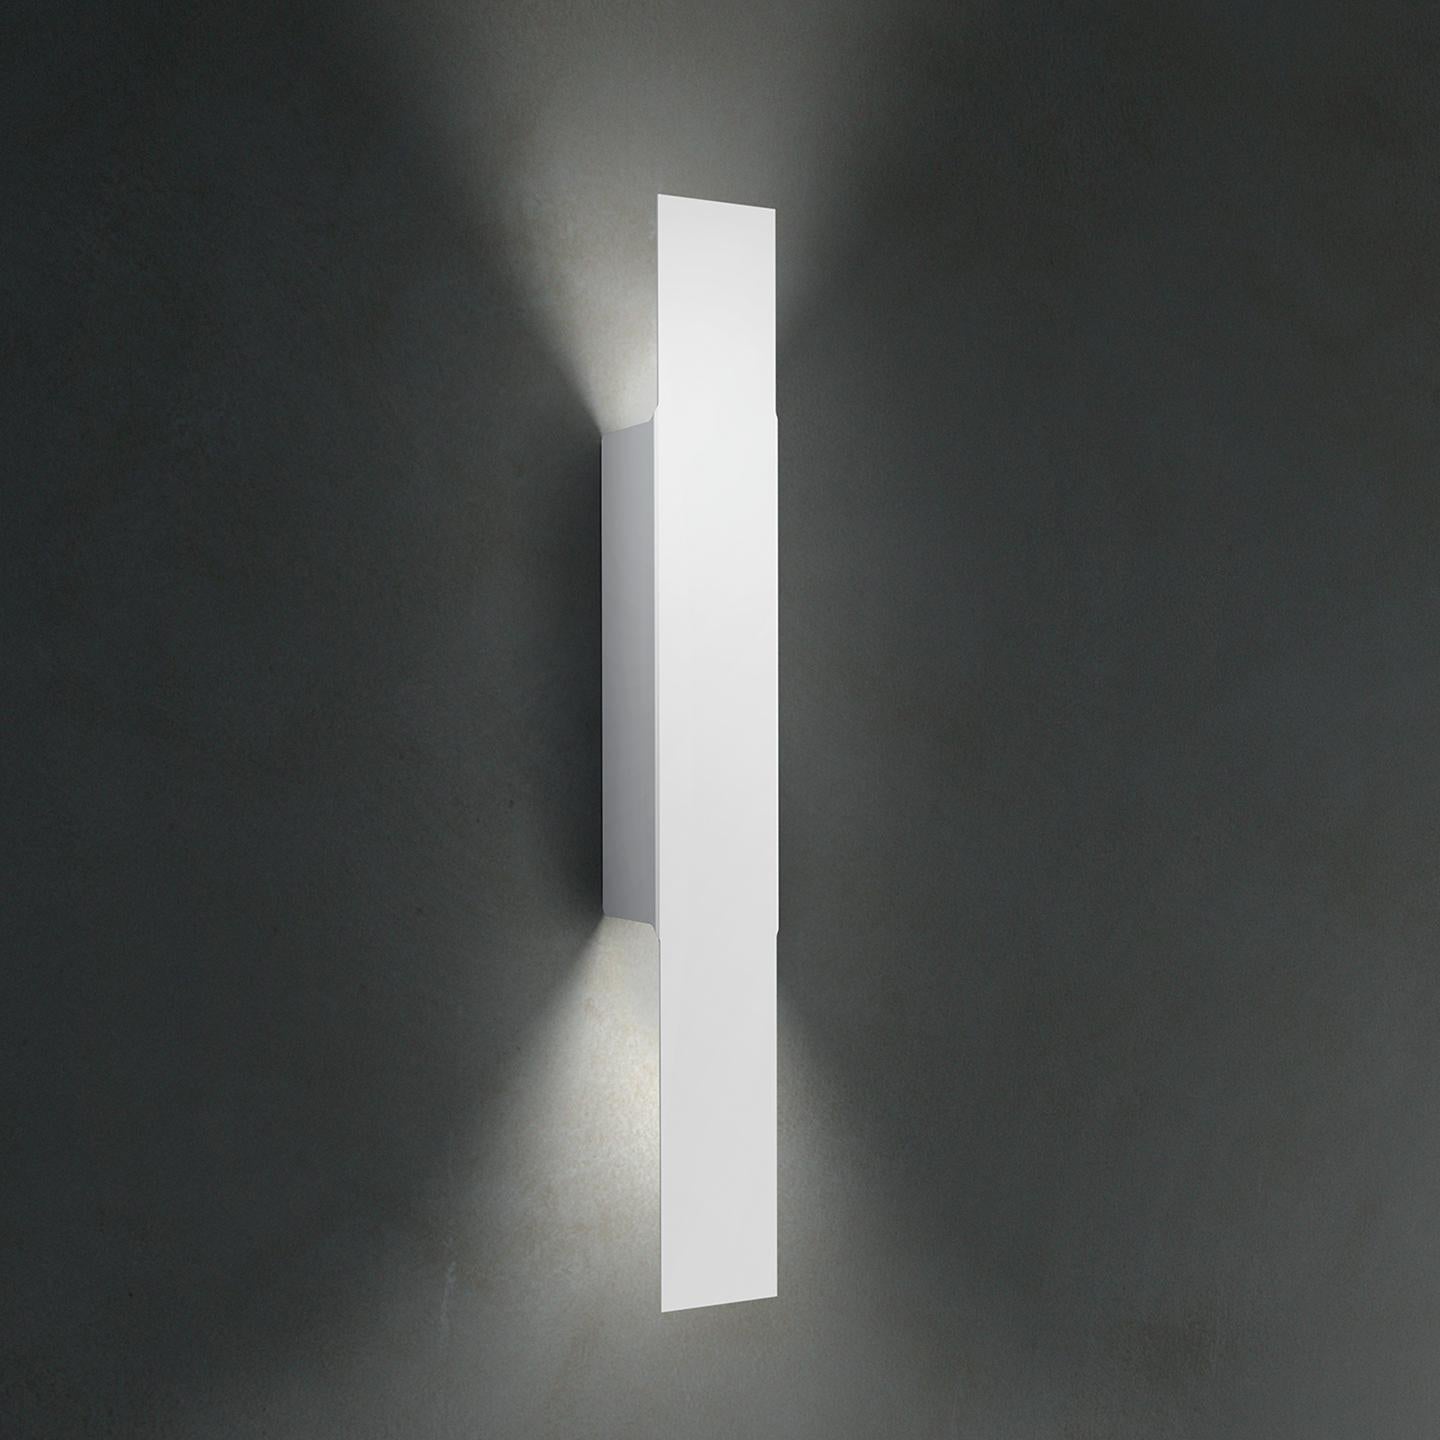 Opi is a sleek and architectural wall lamp made of metal twisted to create a compelling, asymmetric diffuser. It was designed in 2011 by Alessandro Piva to be a minimal yet effective wall lamp that is applicable to many contract or residential